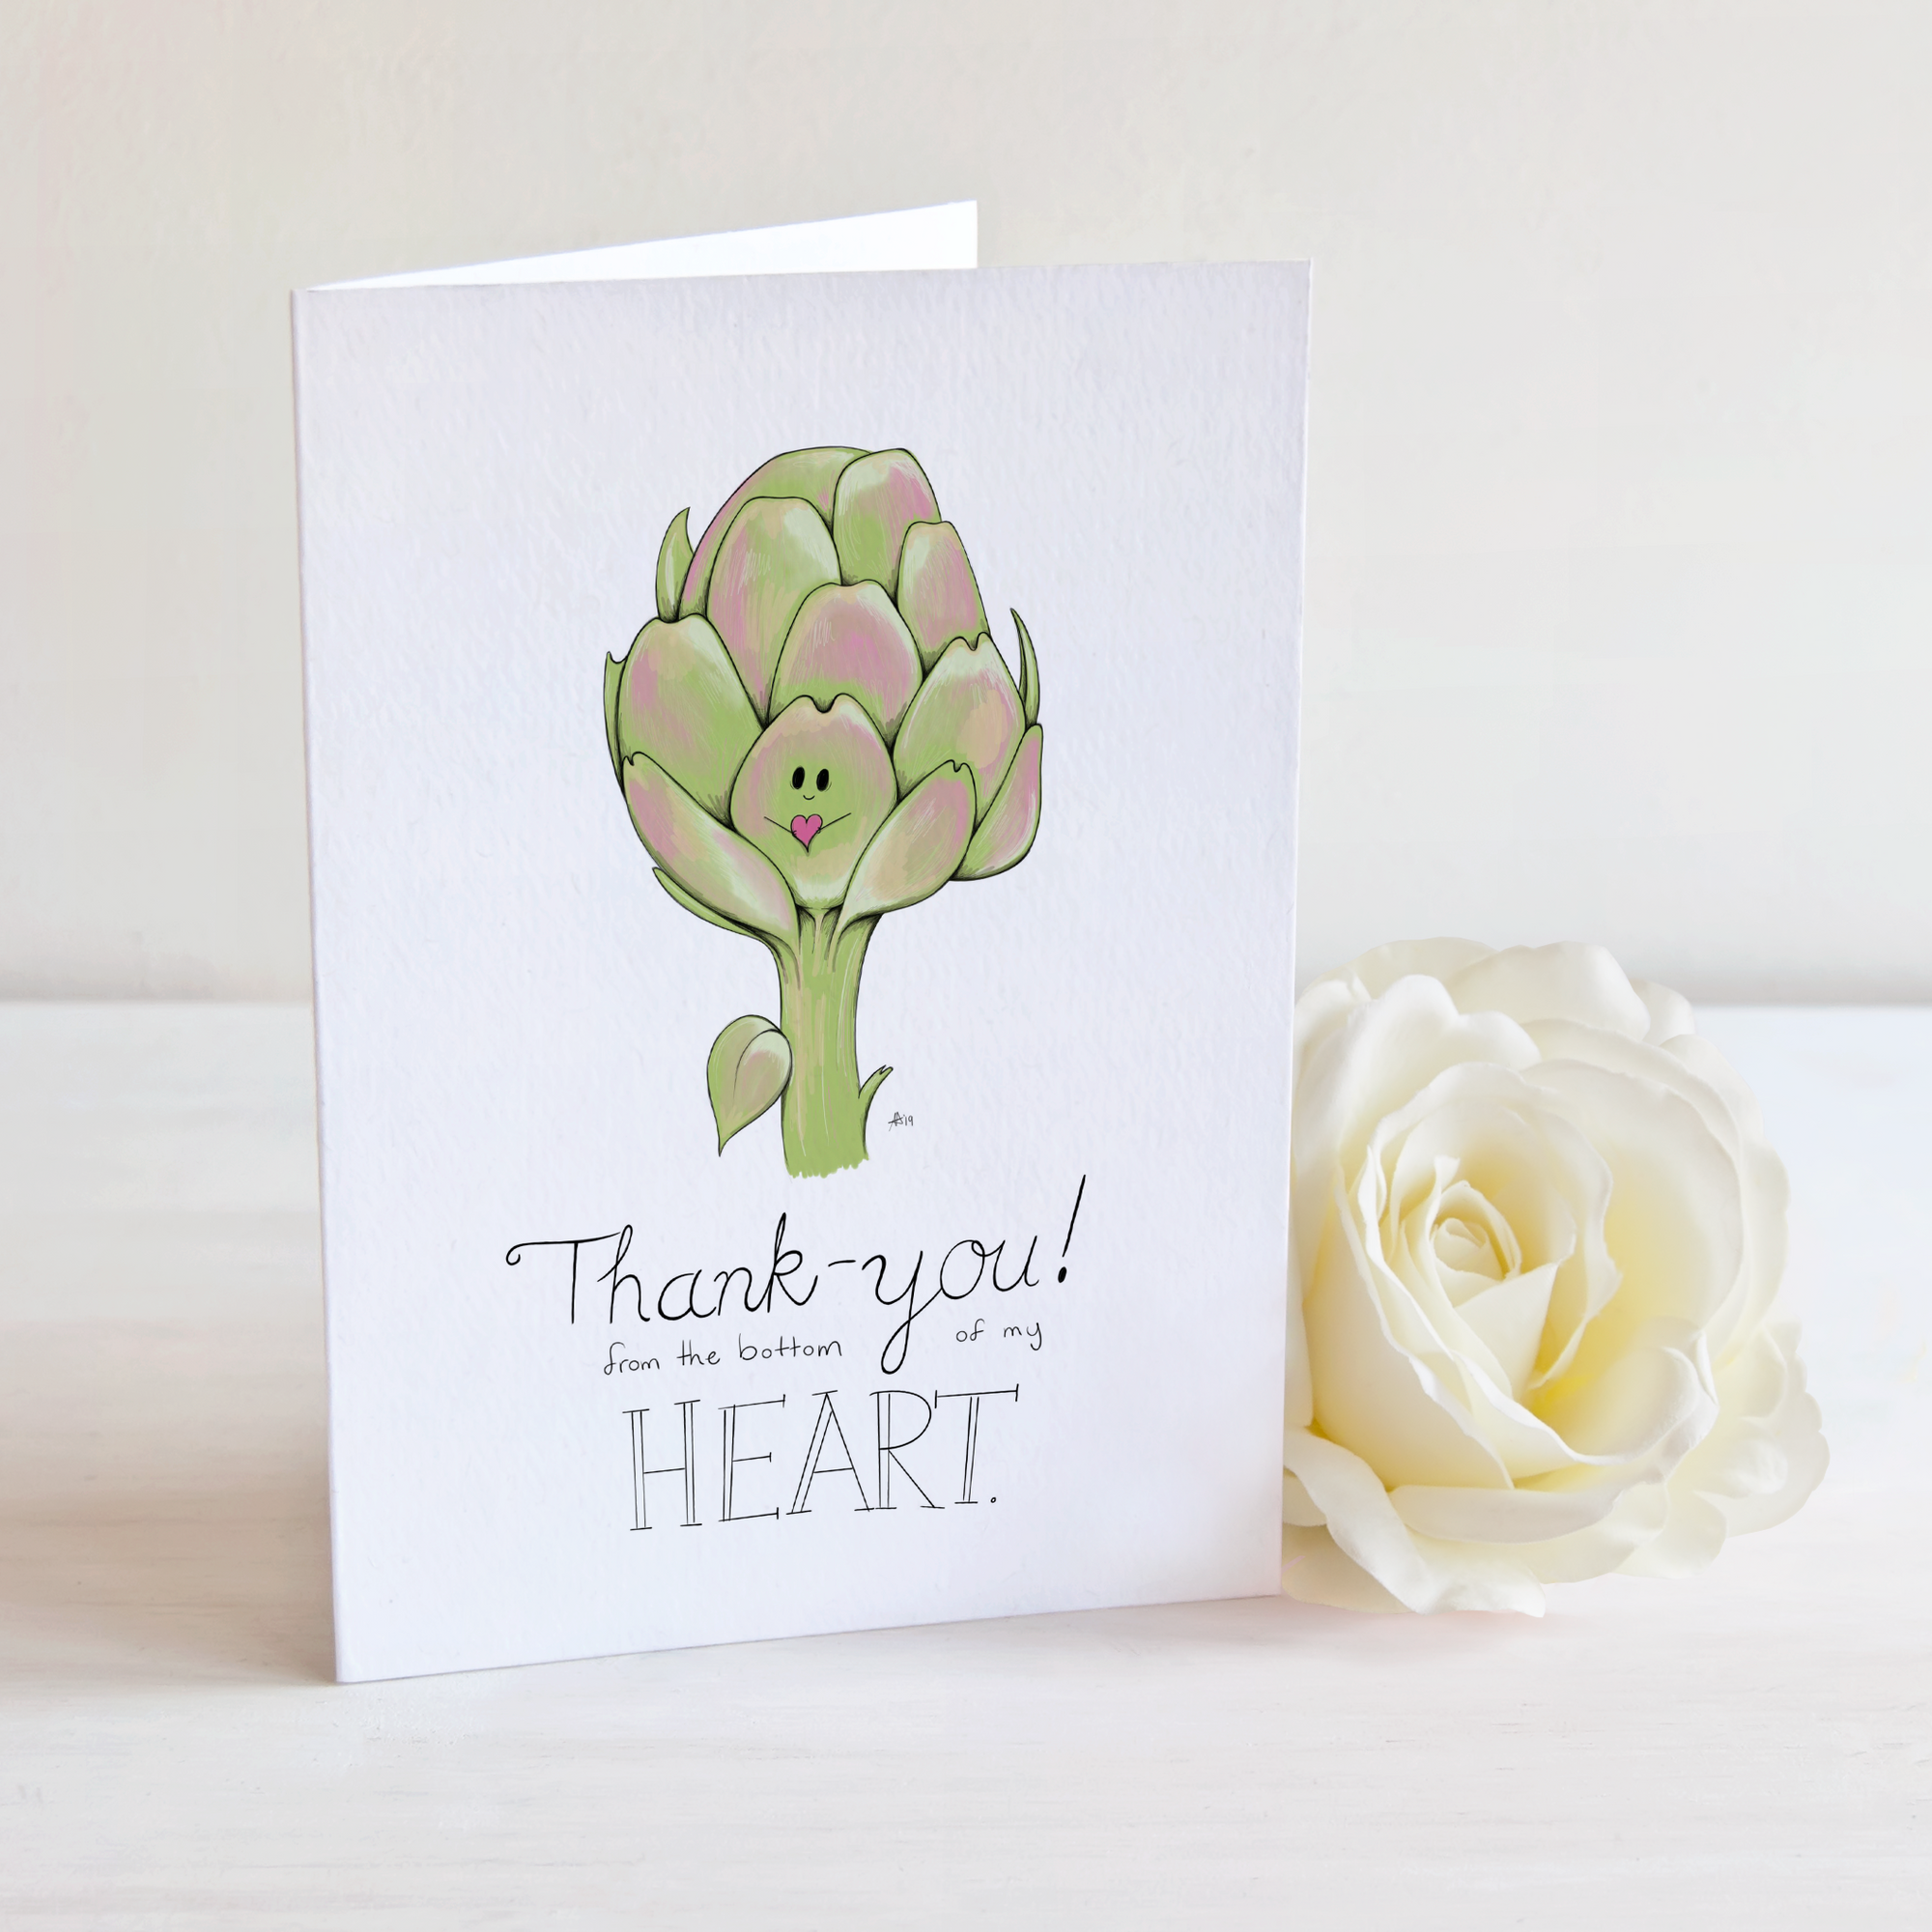 "Thank you! From the bottom of my HEART." - Greeting Card / Small Print